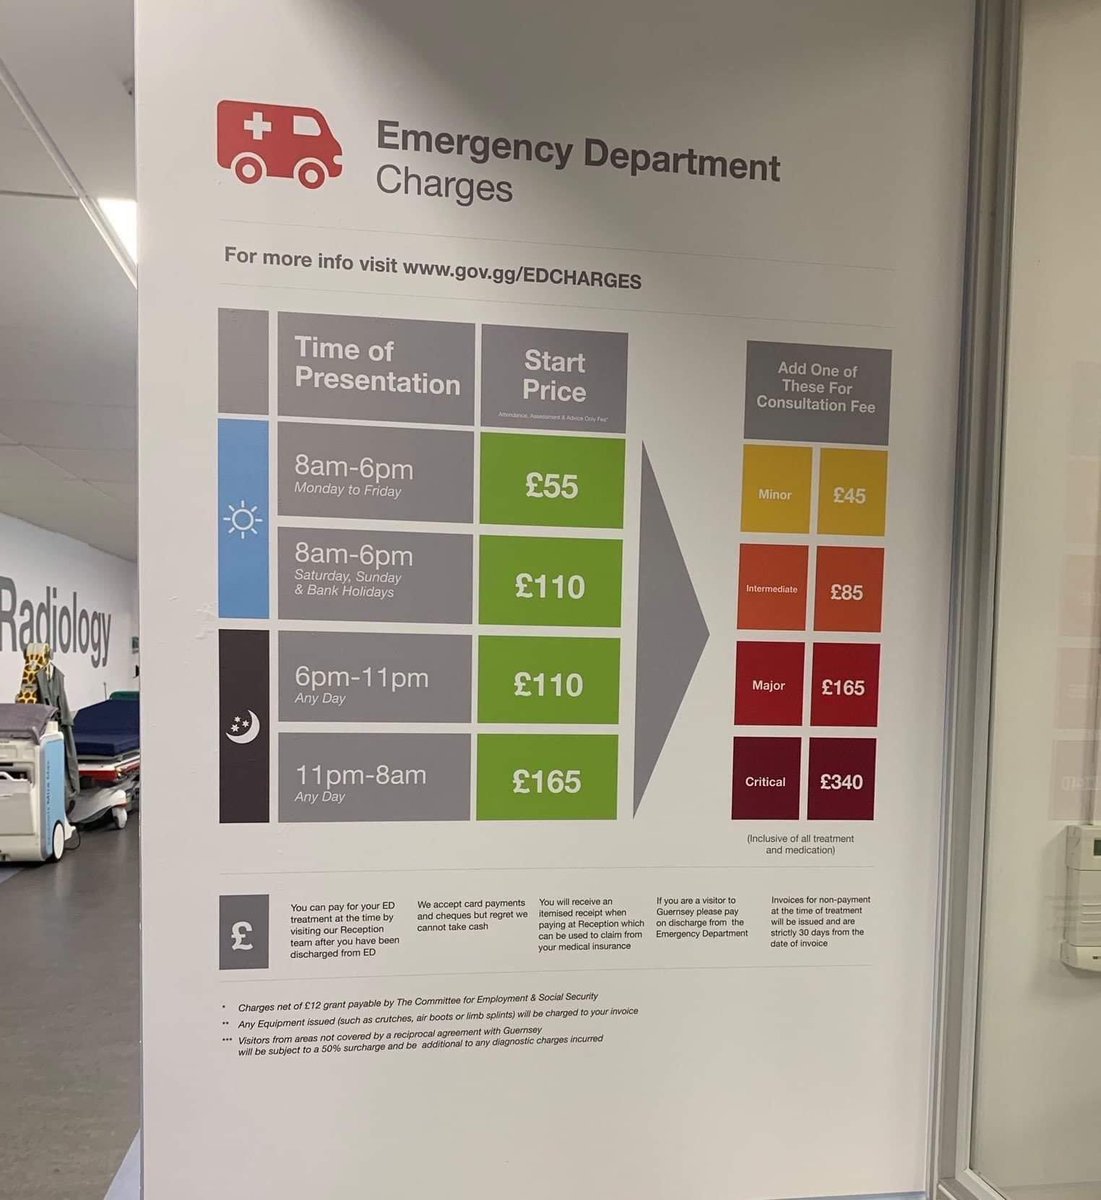 This is from A&E where I grew up (Guernsey). Imagine standing in reception calculating whether you can afford your emergency. Is this really what the UK wants to join in on? Picture not mine - it’s from 2019 so no idea if the charges have gone up since then. One would assume so.